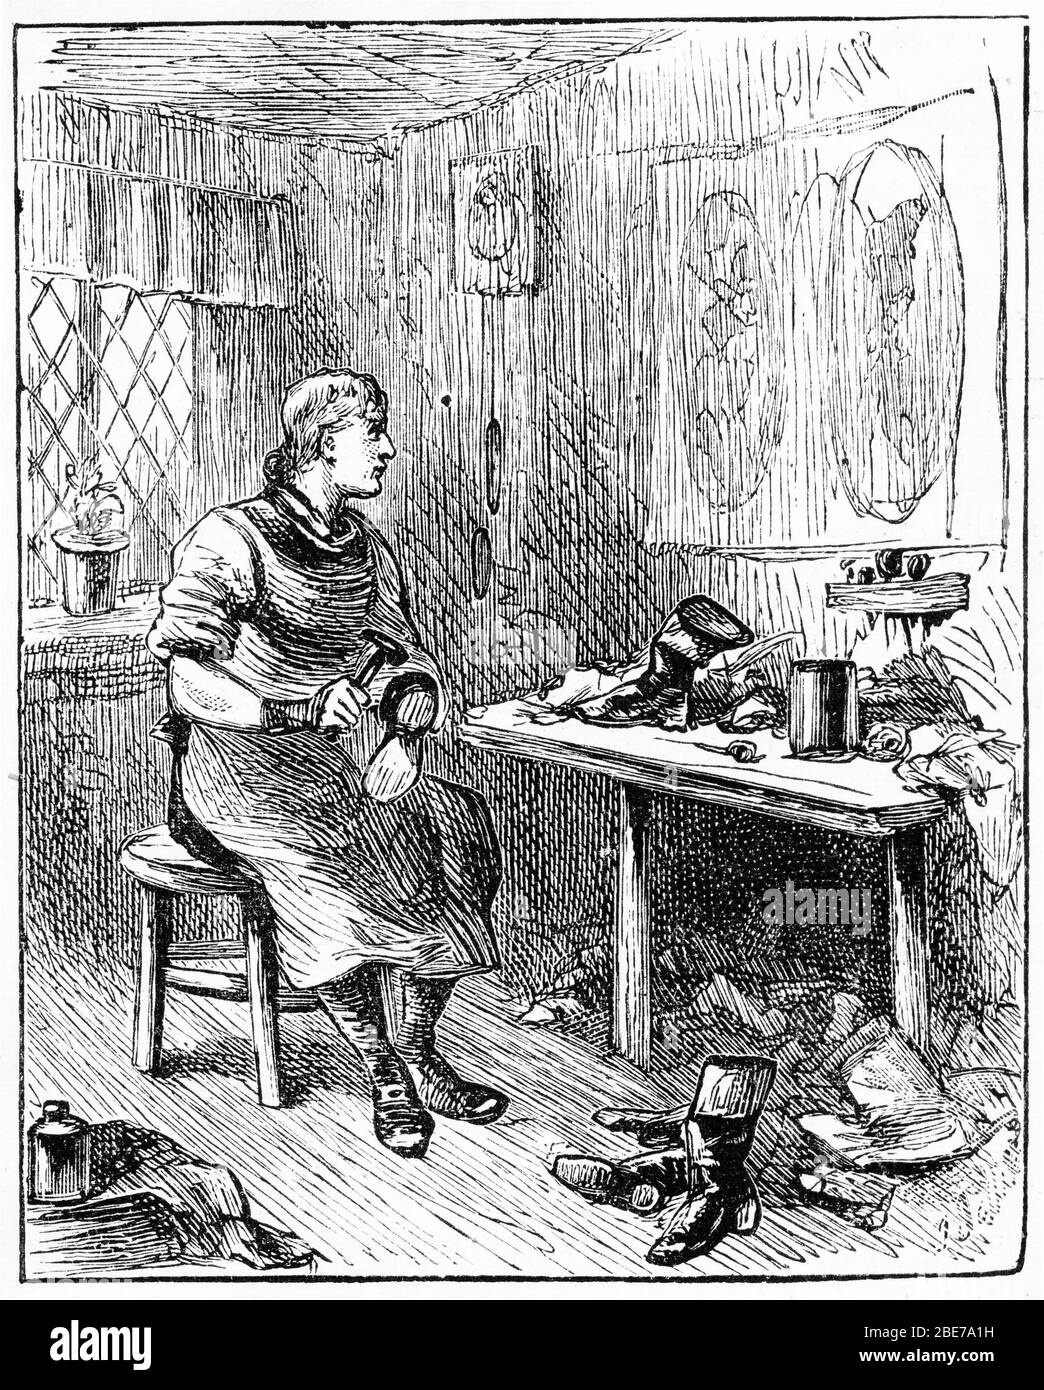 Engraved portrait of a cobbler at work in his workshop making shoes Stock Photo